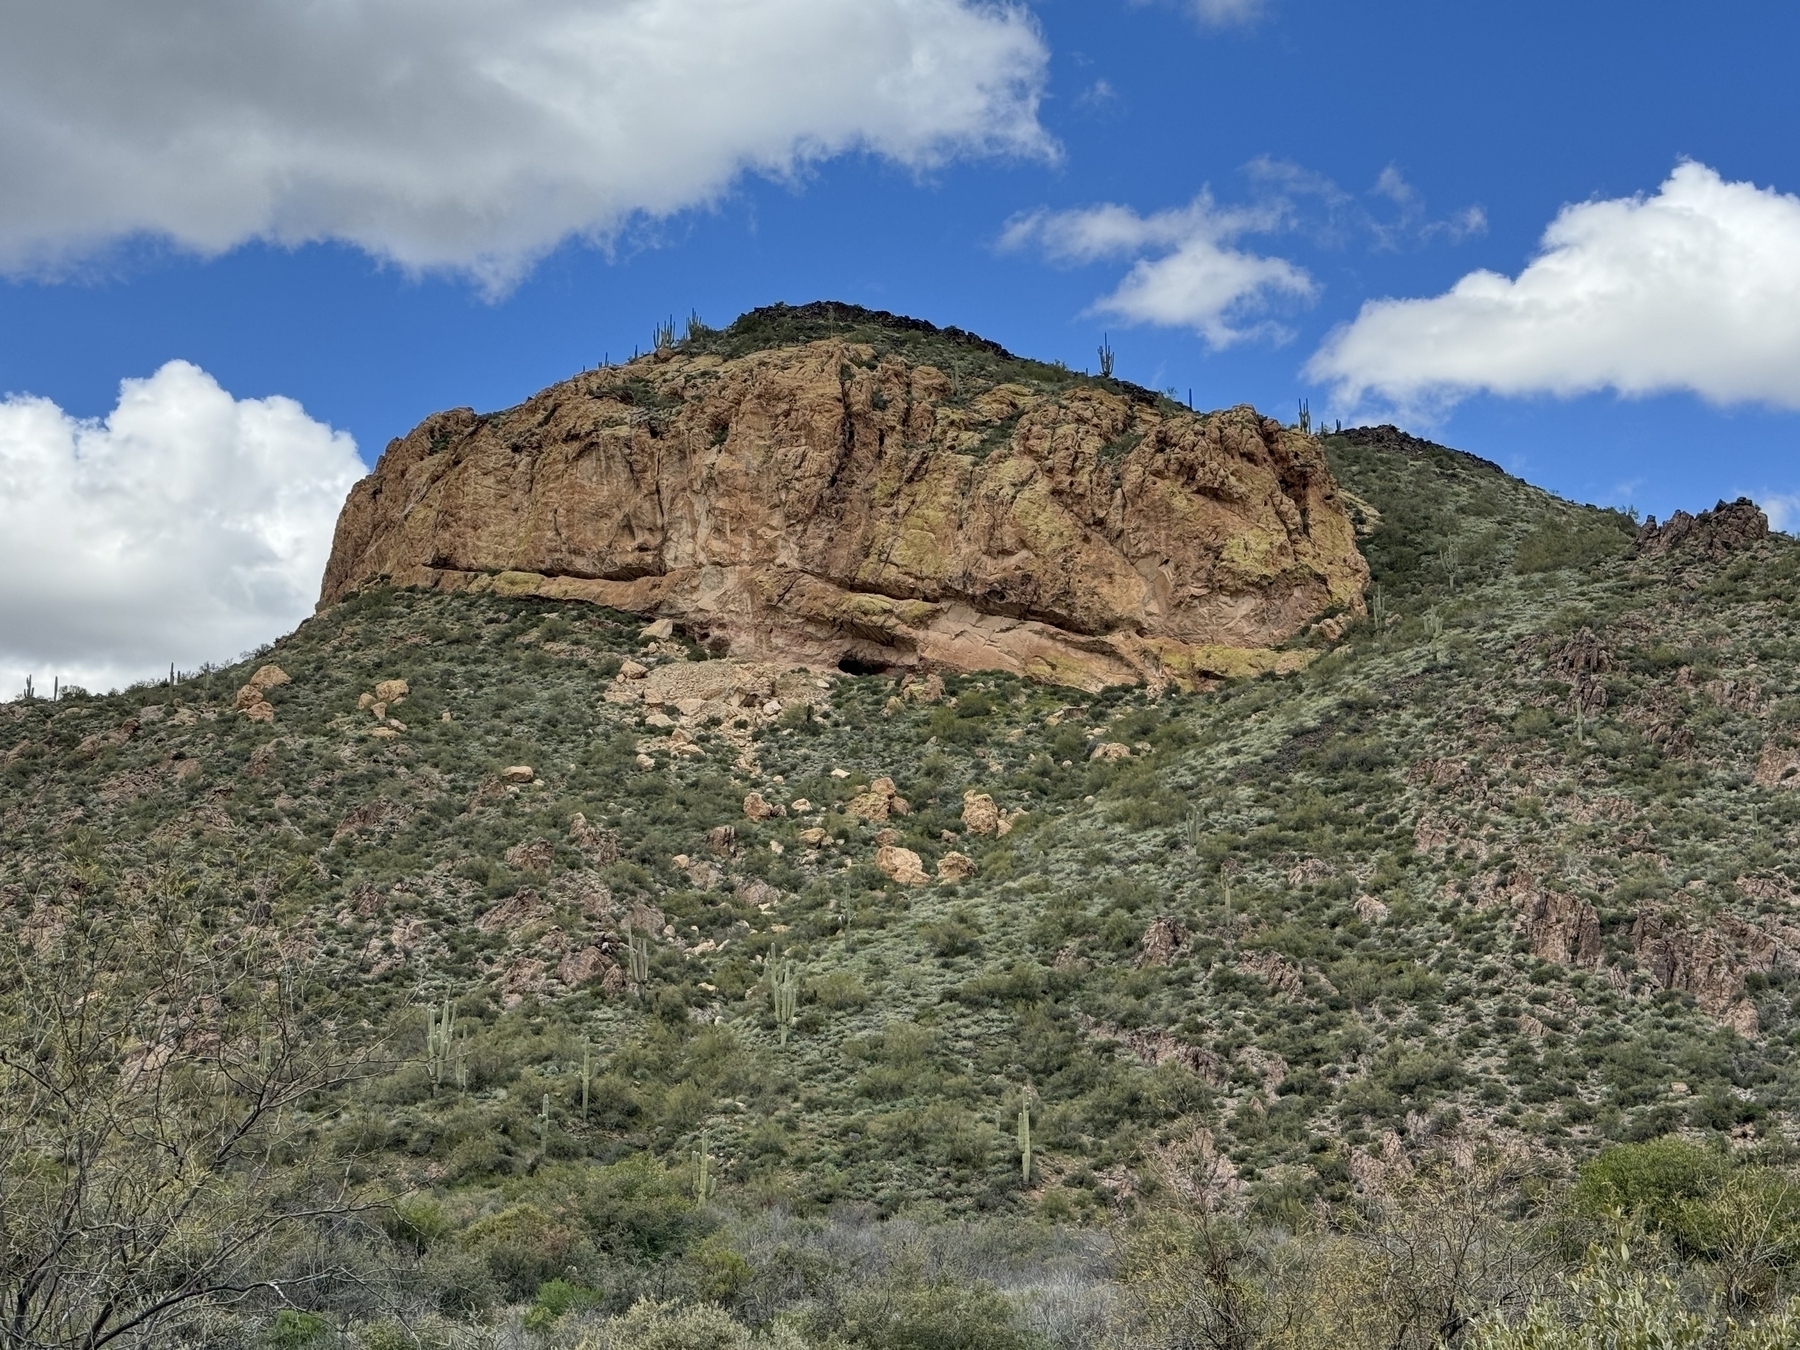 A mountain in the Sonoran desert in the Phoenix area with lots of desert foliage growing up around its base. 